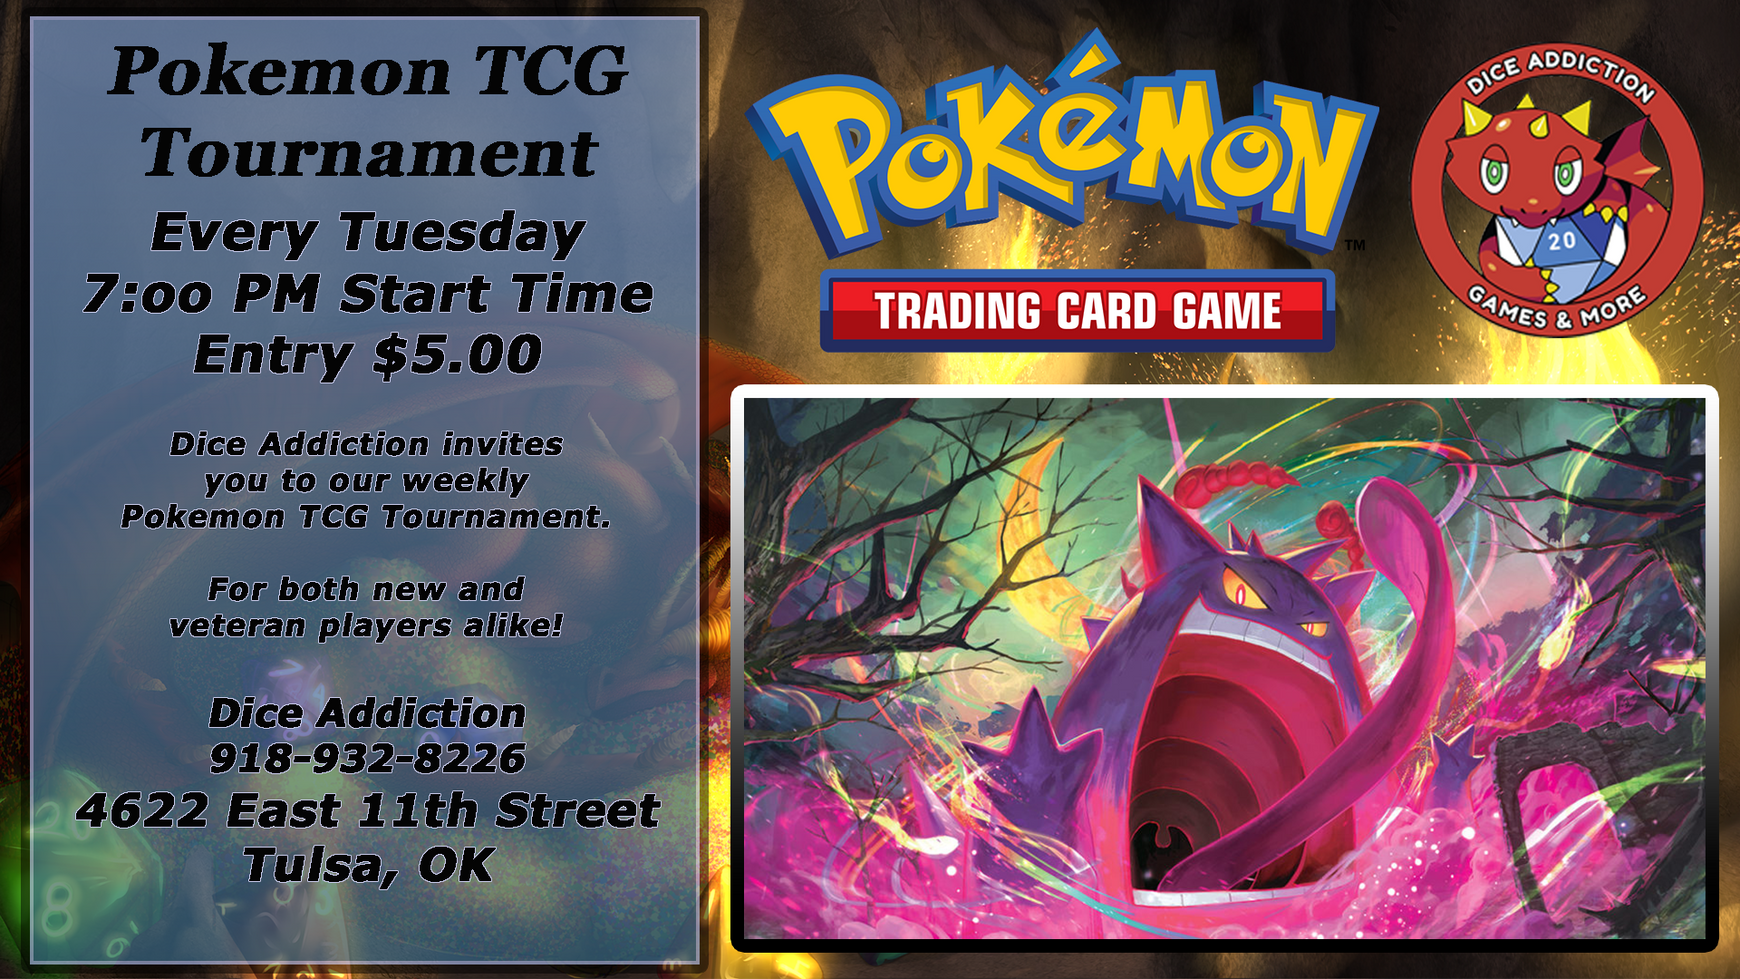 Tuesday Night Pokemon Tournament Hosted by Dice Addiction